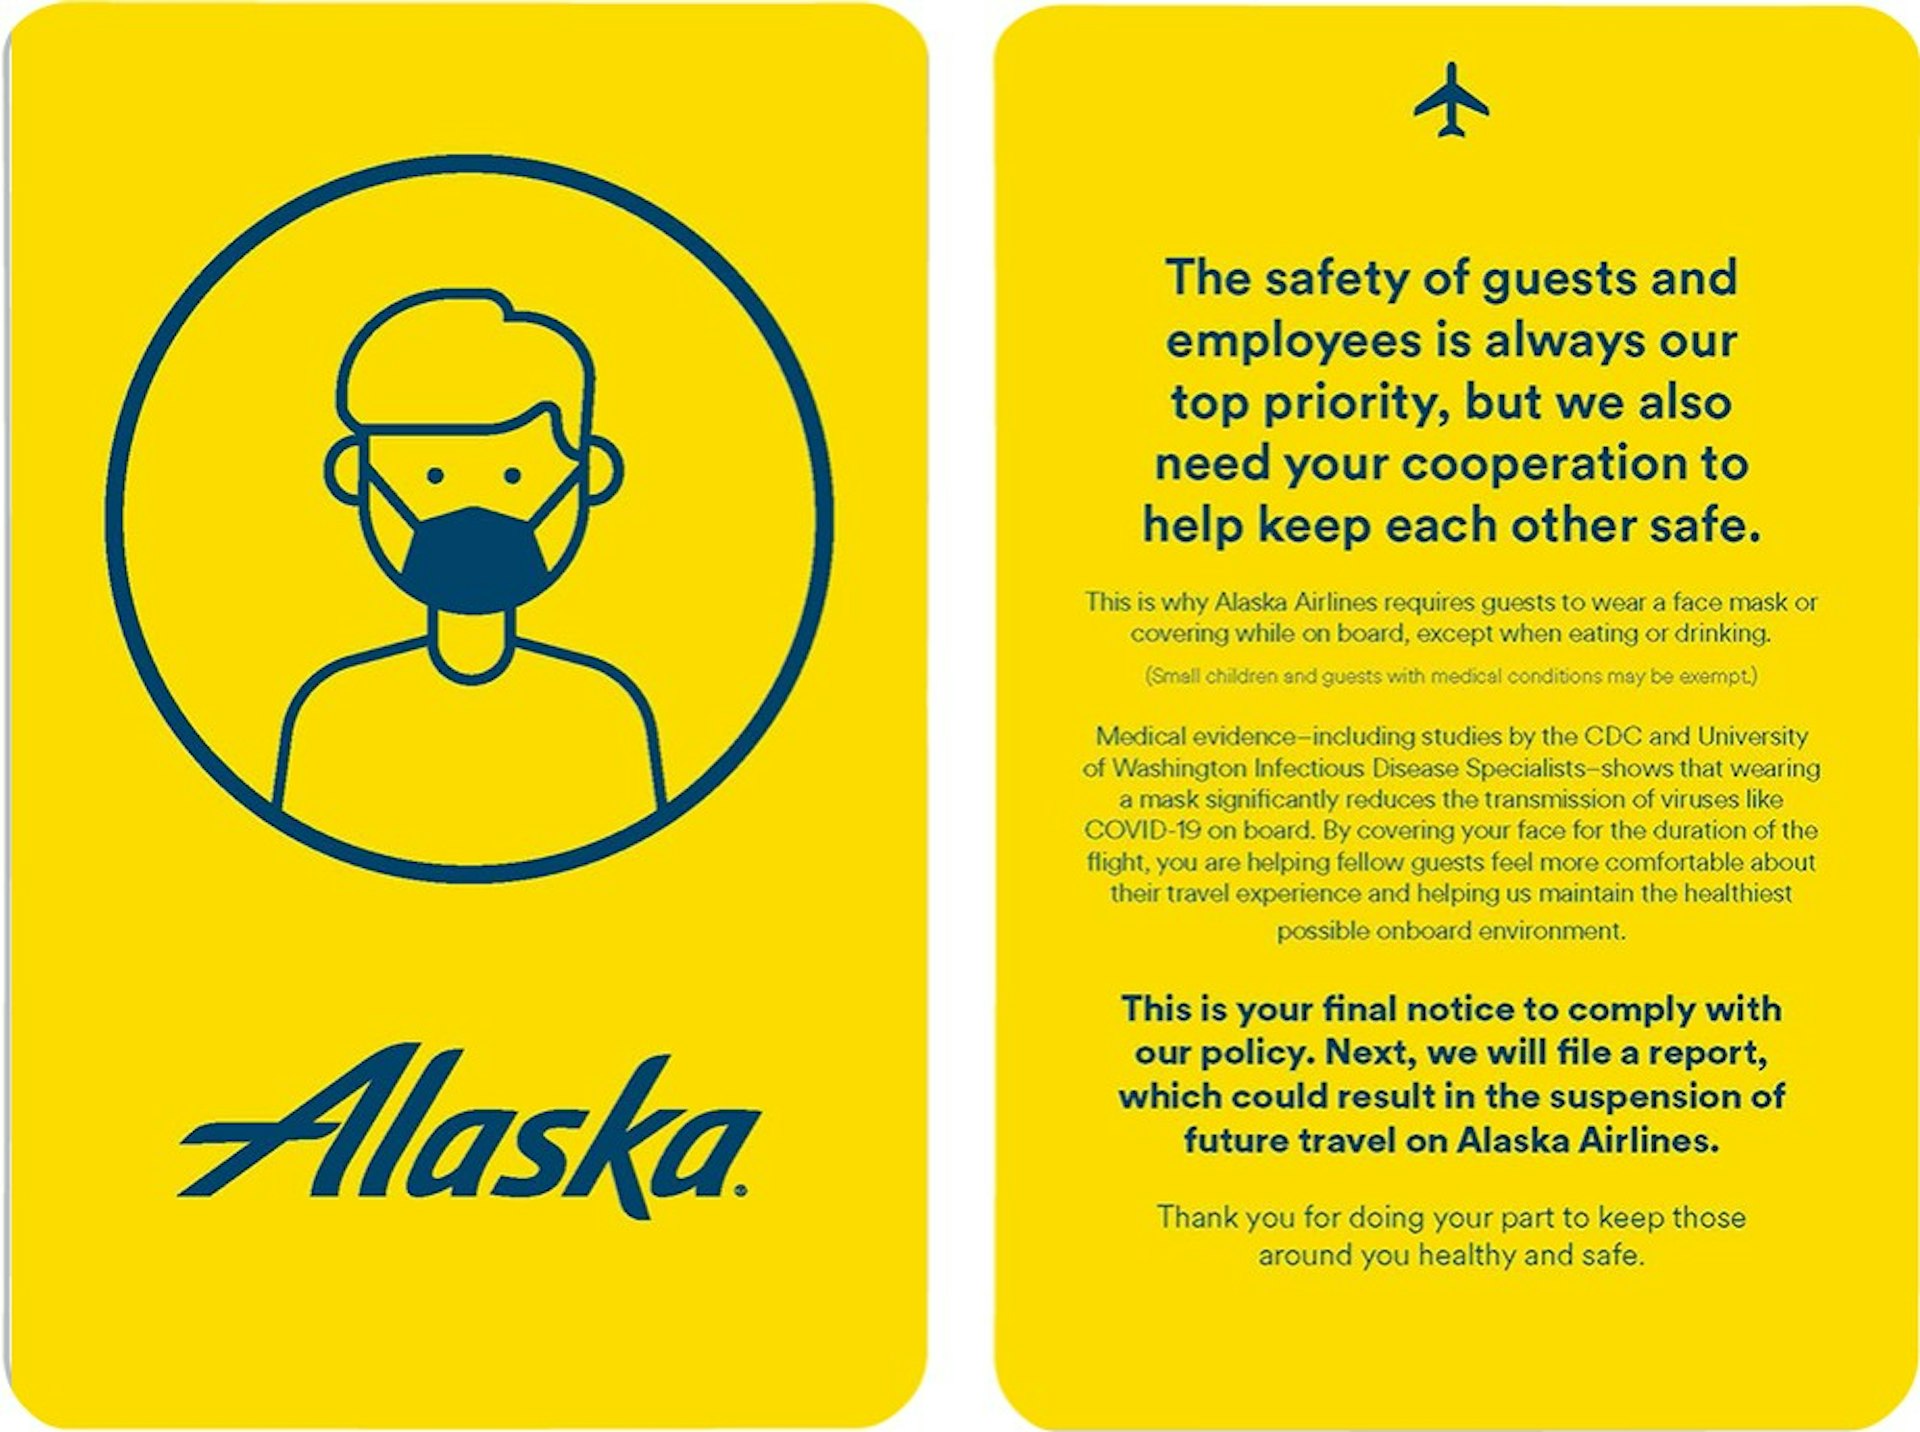 The Yellow Card given by Alaska to passengers who won't wear masks